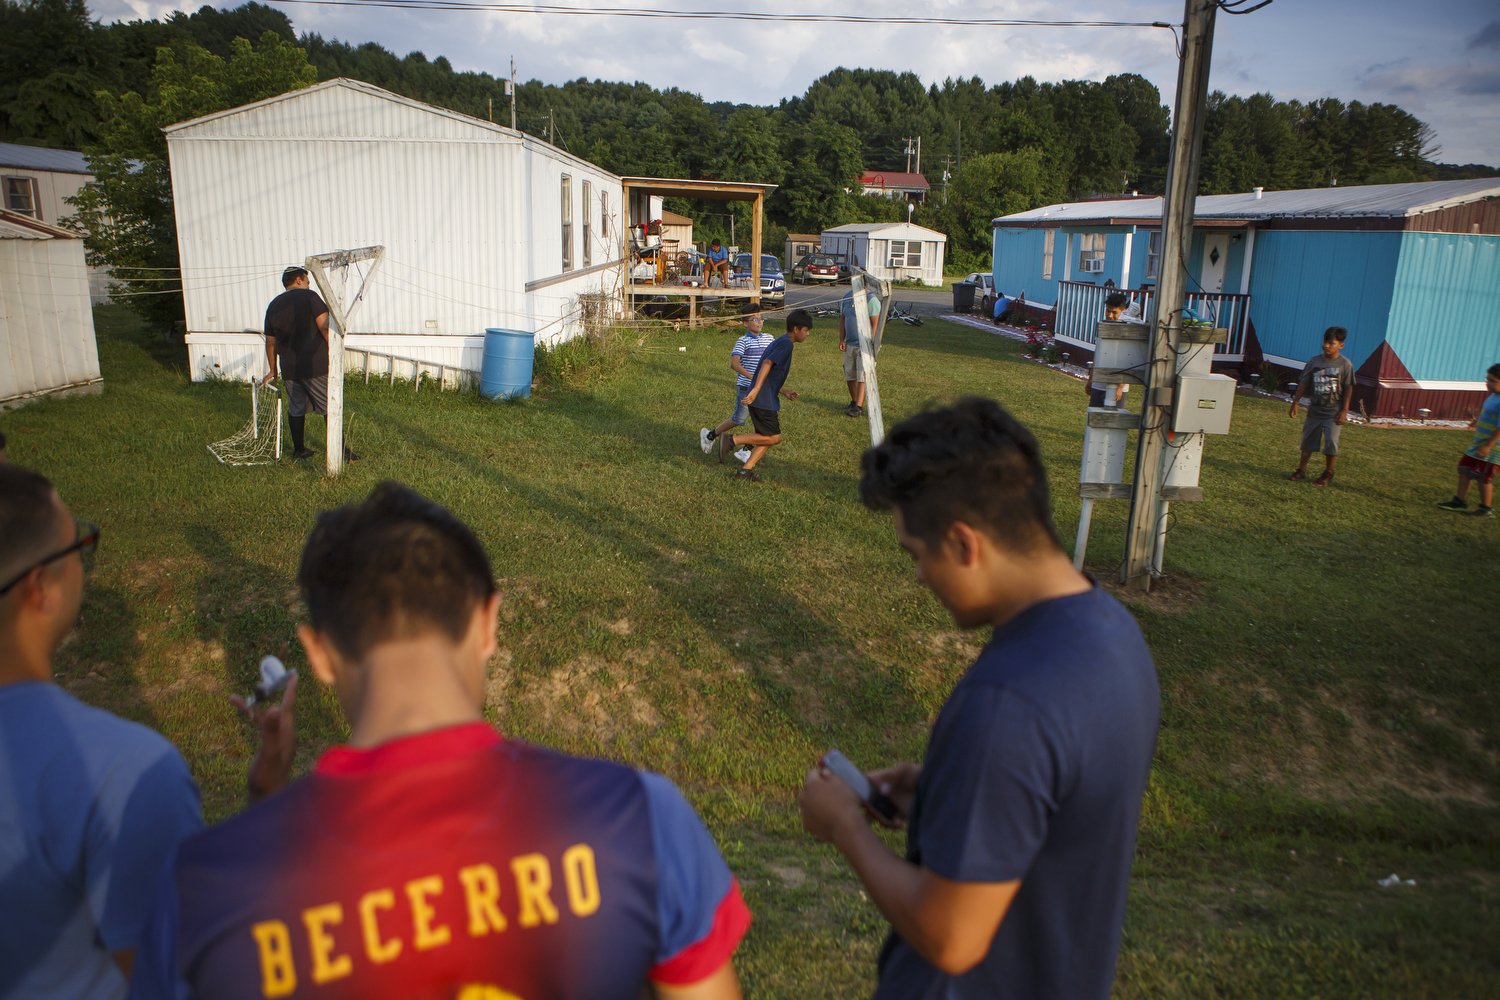  Children play soccer in the predominantly Hispanic trailer park off Hanes Road in Galax, Virginia. With a population of just around 7,000, the small town of Galax in rural southwest Virginia has one of the fastest-growing Hispanic populations in the